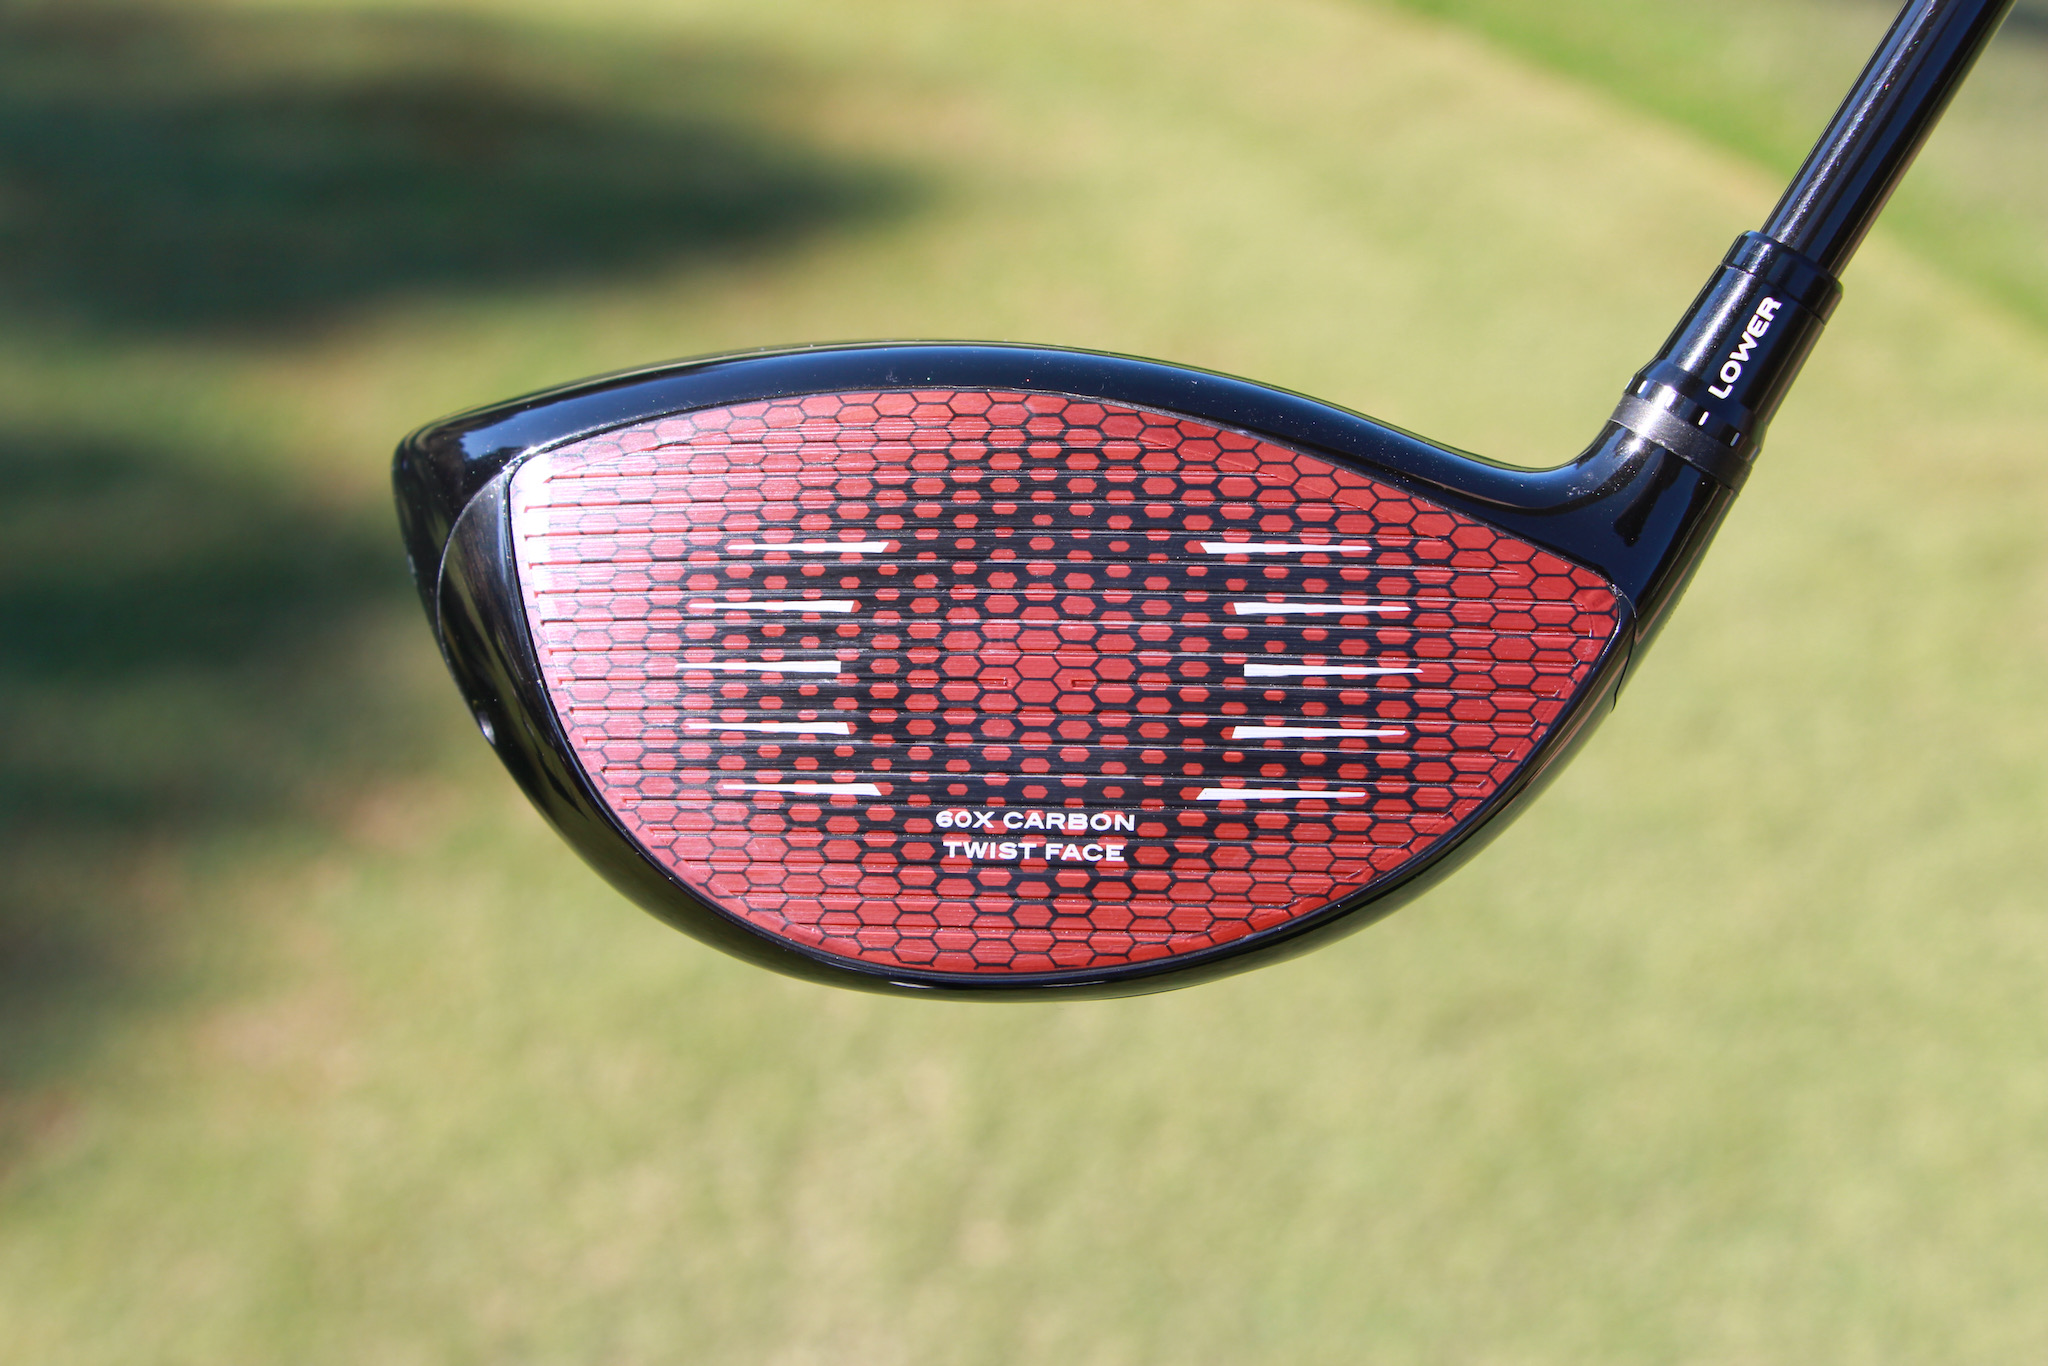 TaylorMade Stealth driver: Face view